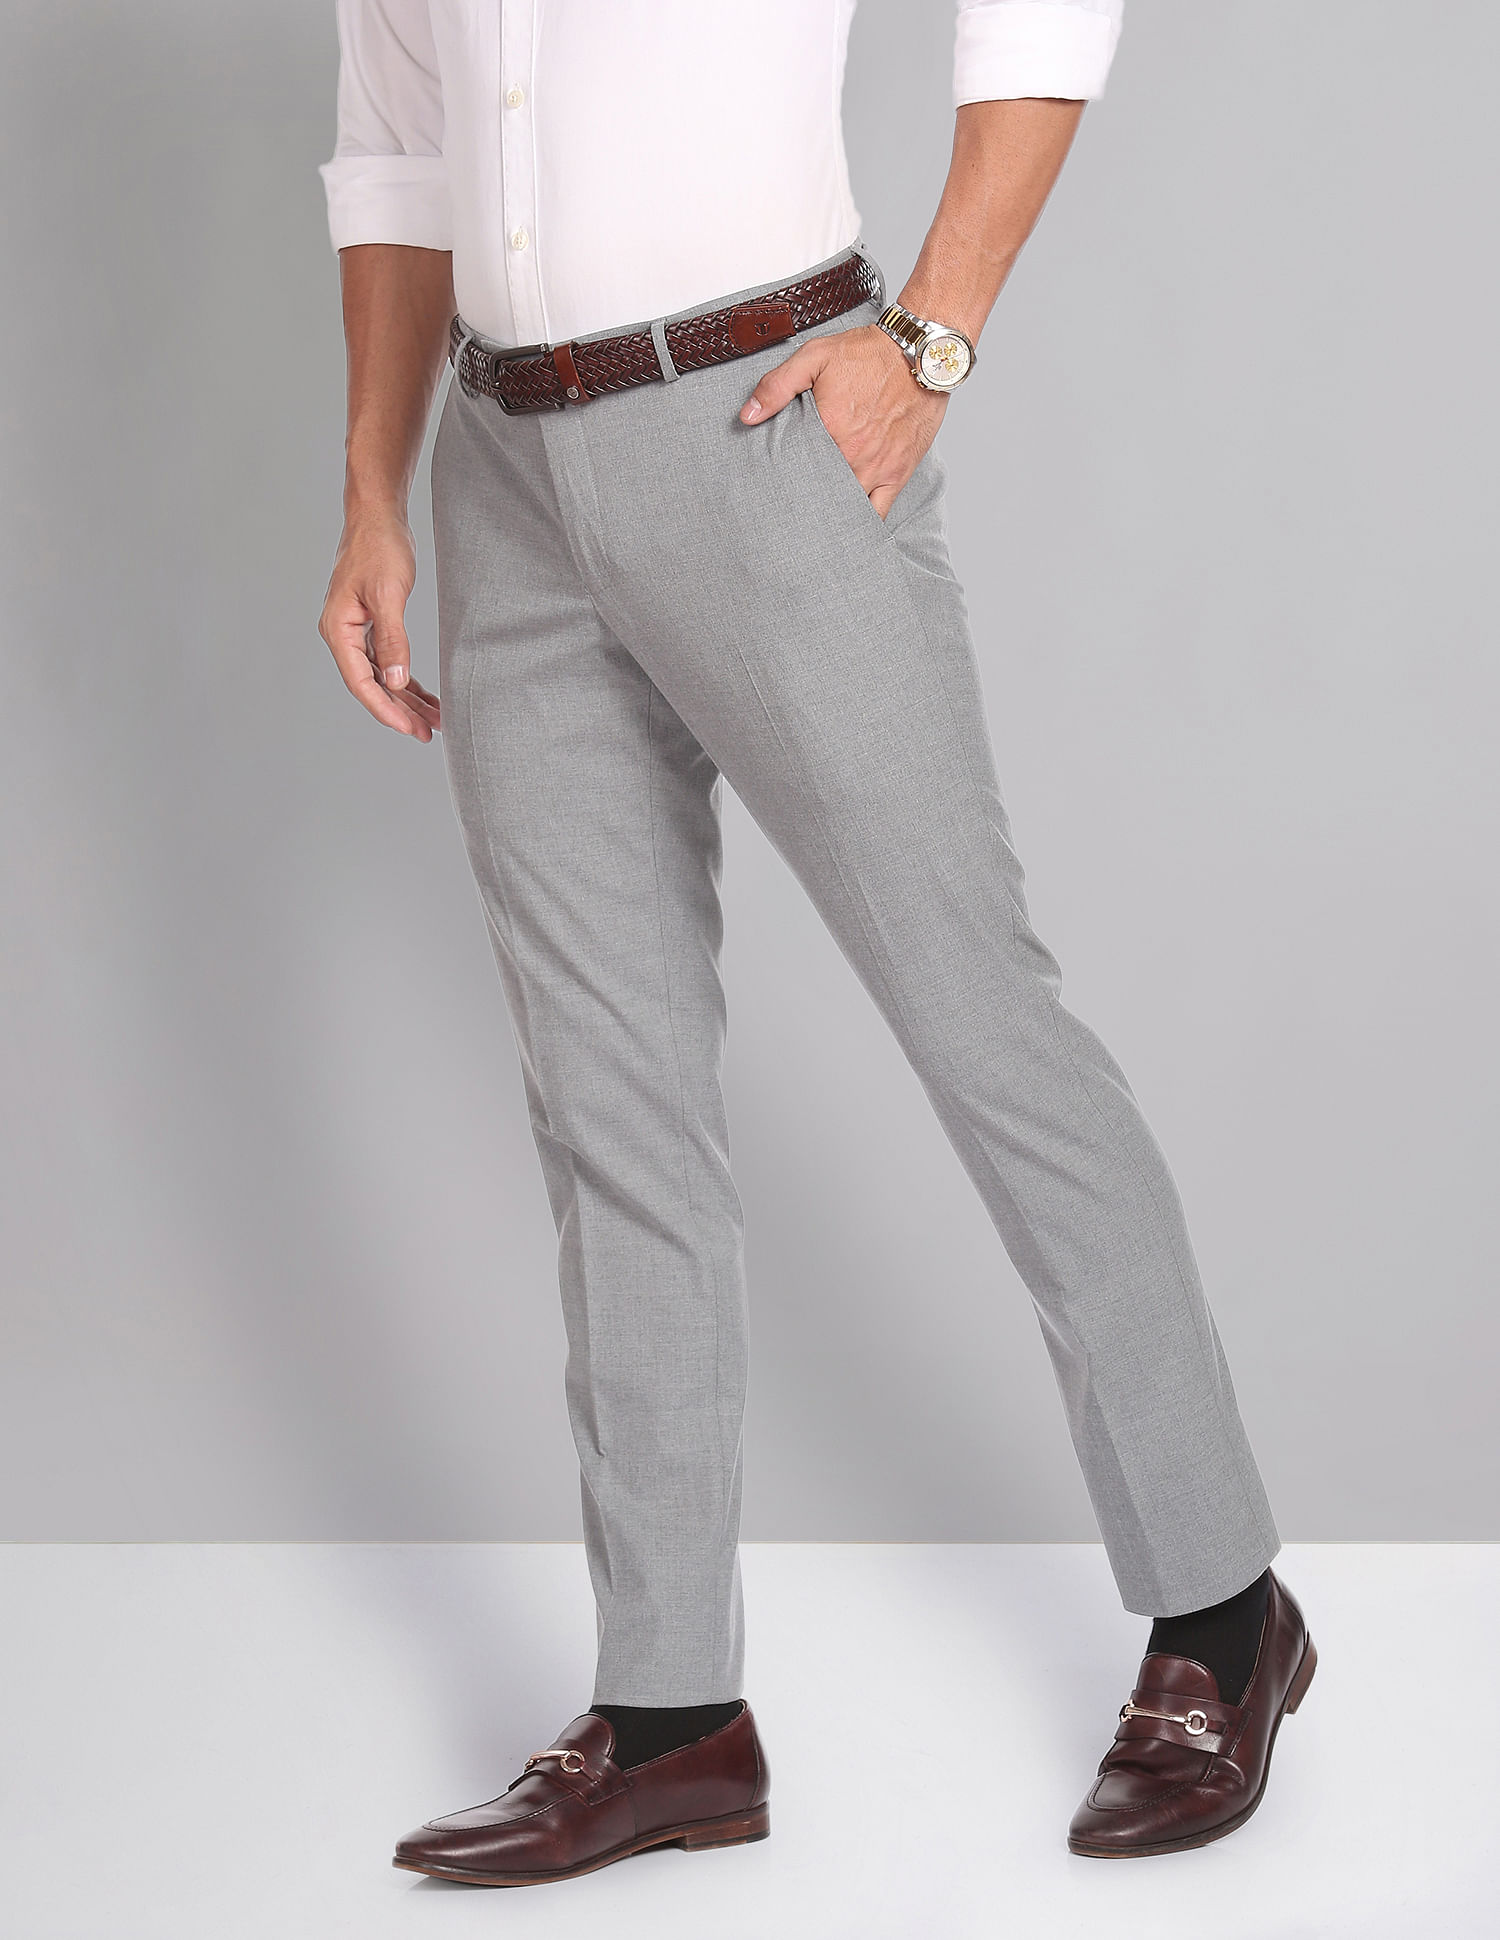 Buy AD by Arvind Smart Waist Heathered Formal Trousers - NNNOW.com